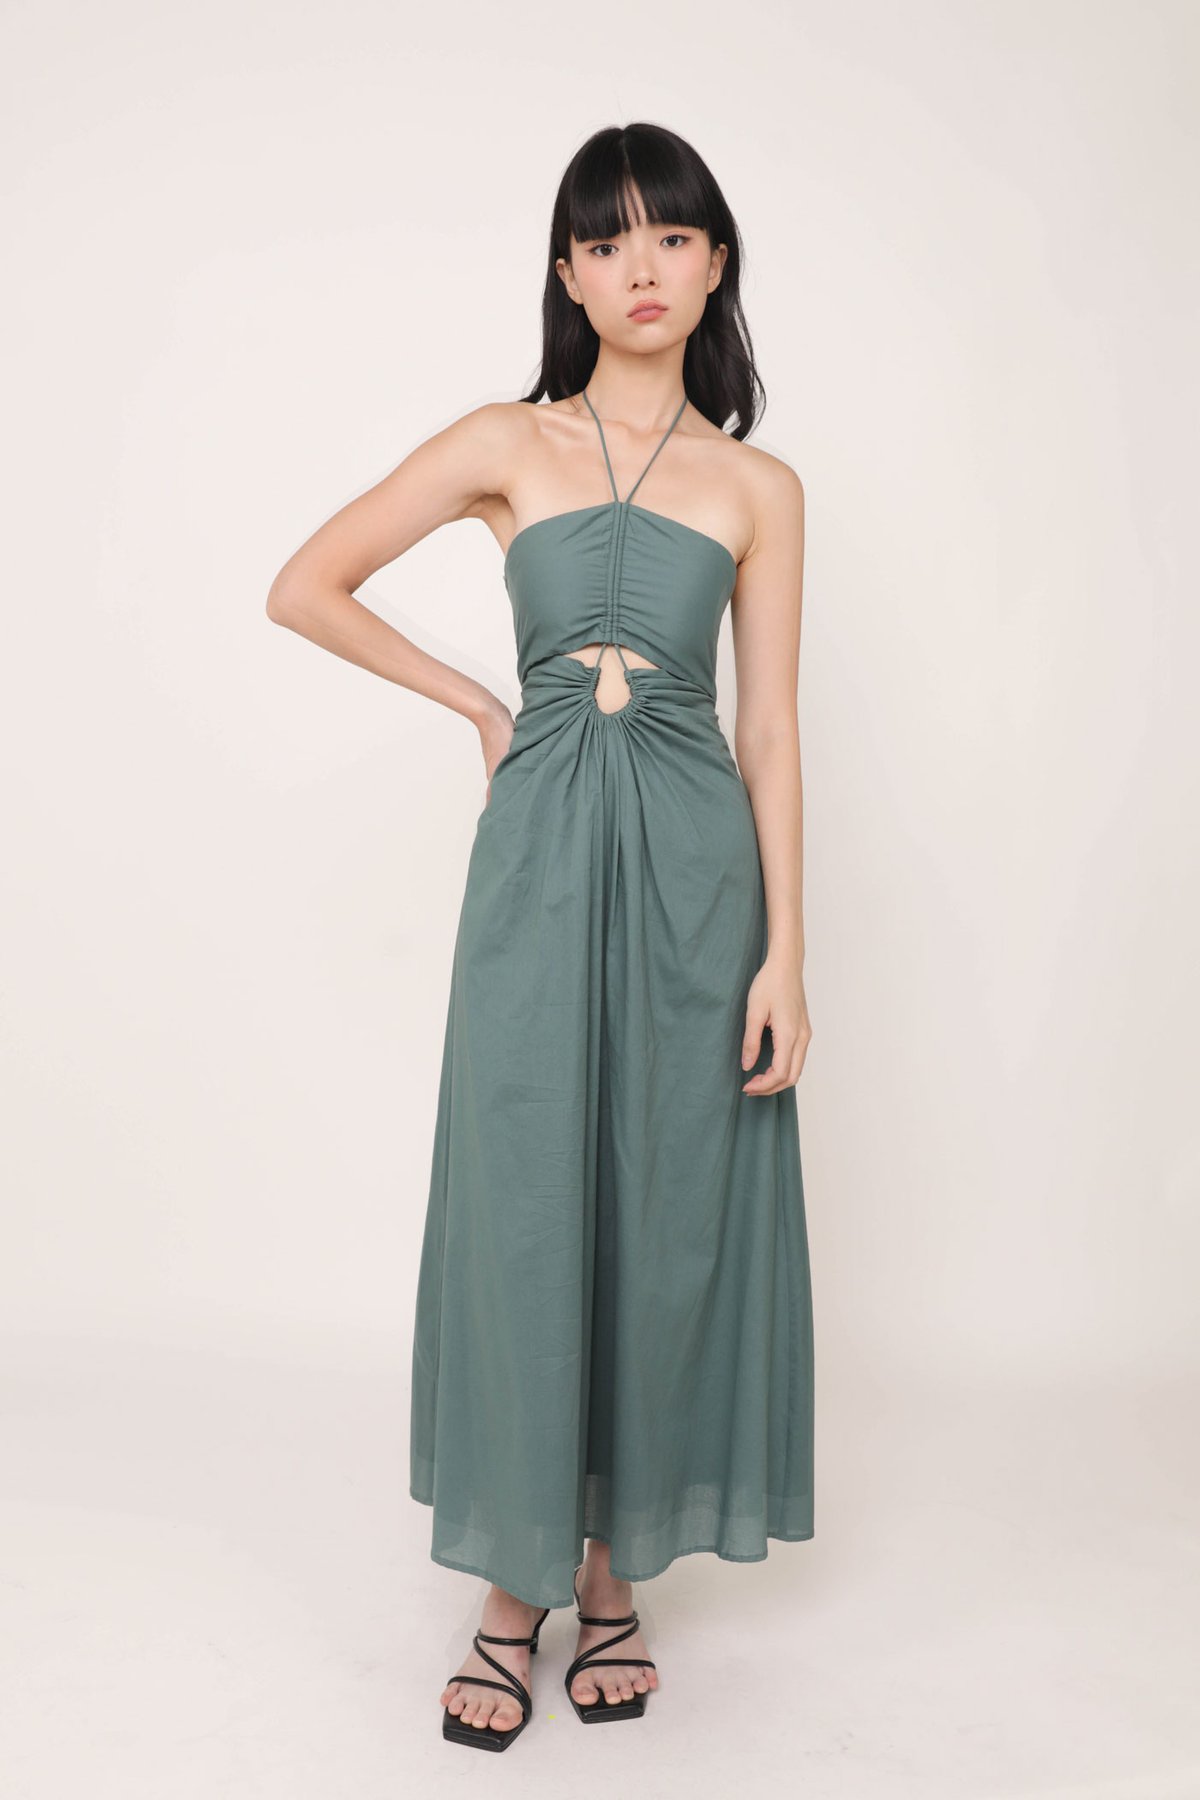 Meia Halter Ruched Padded Dress (Emerald)